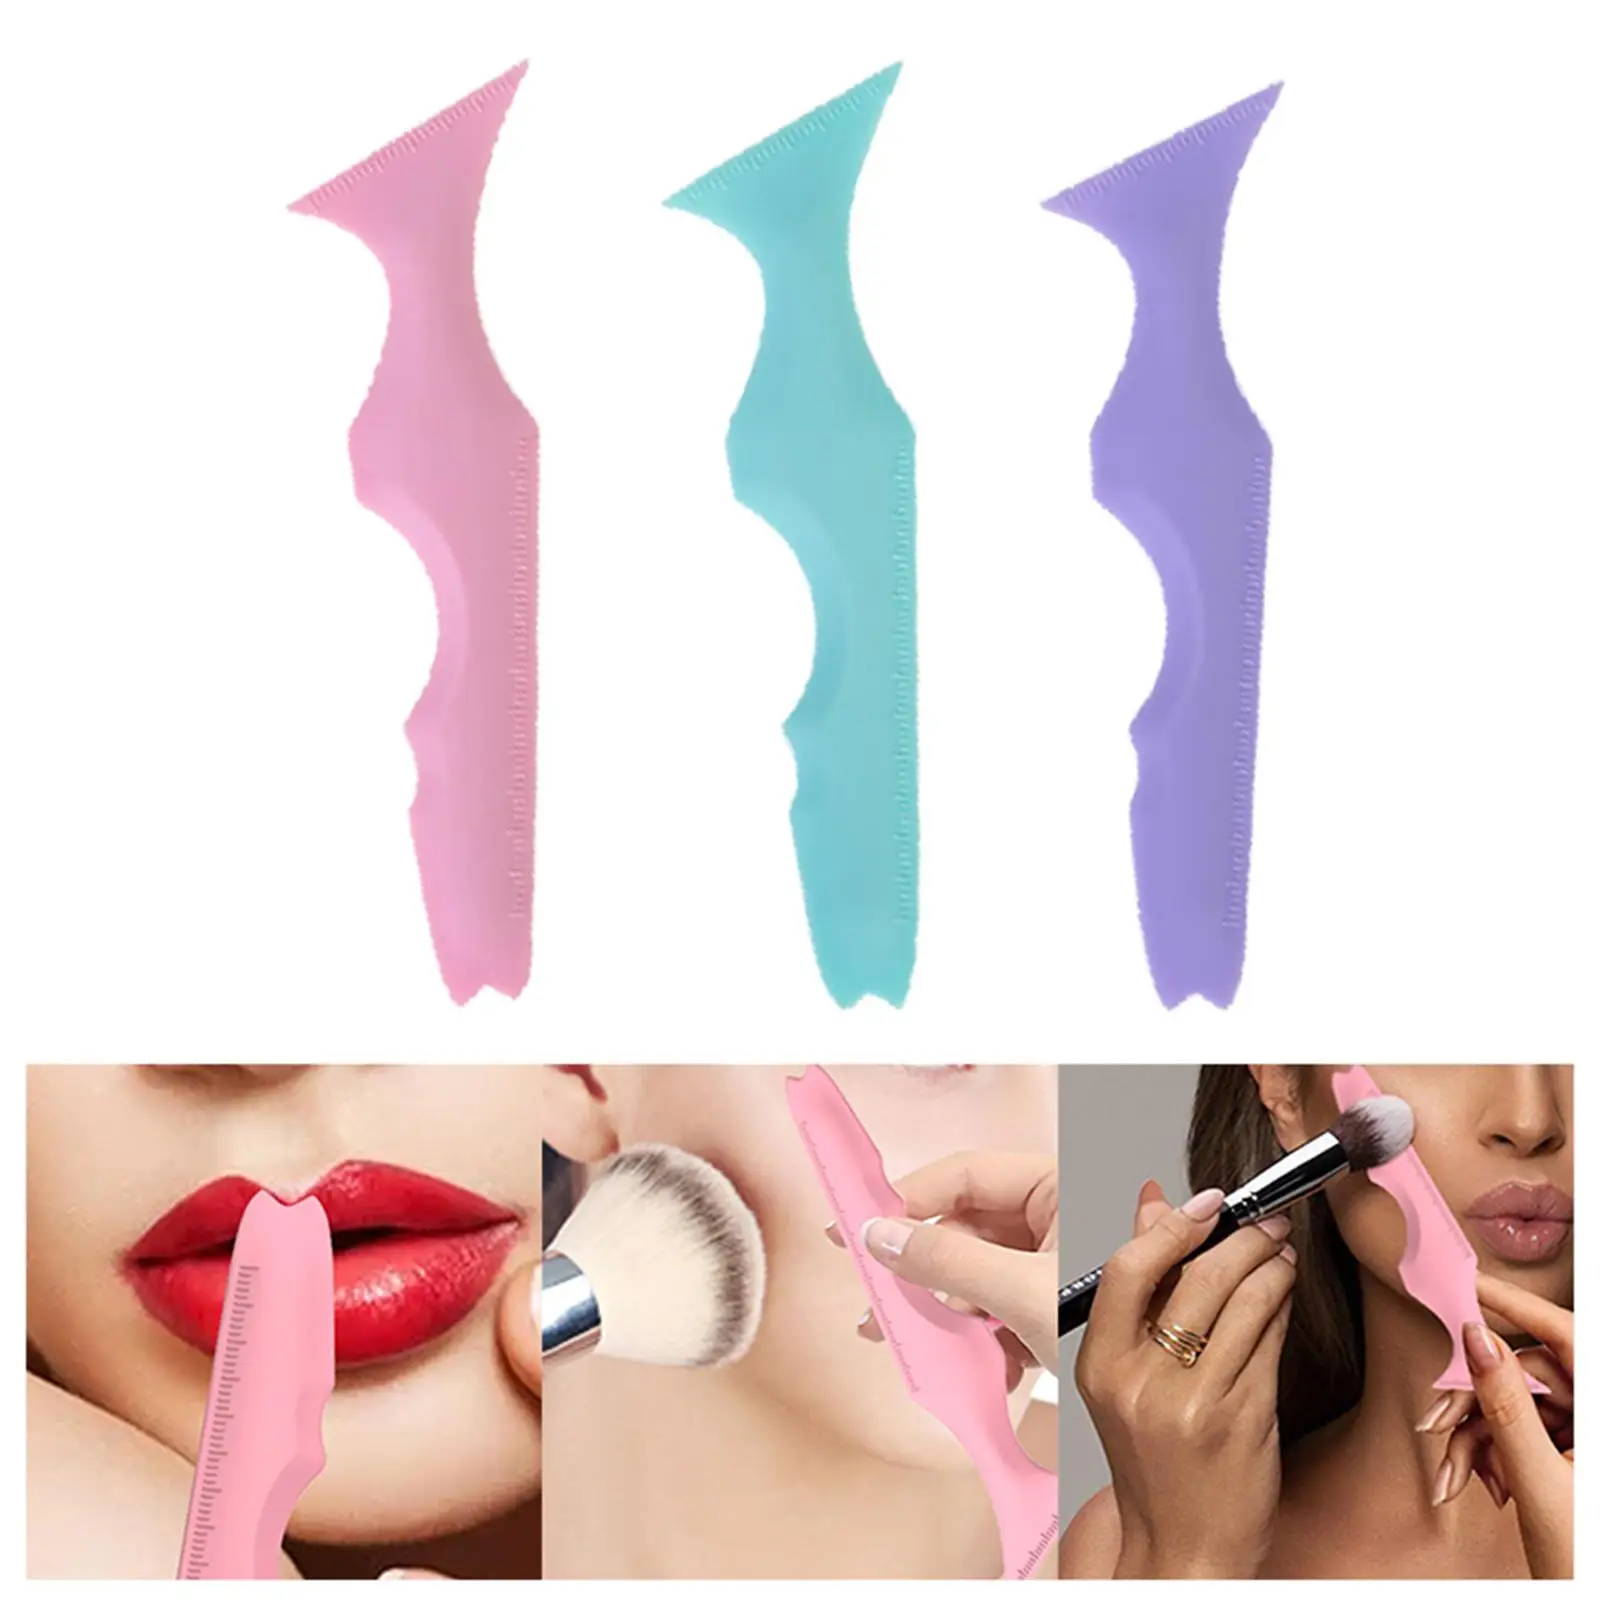 Multifunctional Eyeliner Stencils Lipstick wearing Aid Template Quick Makeup Tool Eyeliner Assistant for Women Beginners Lady